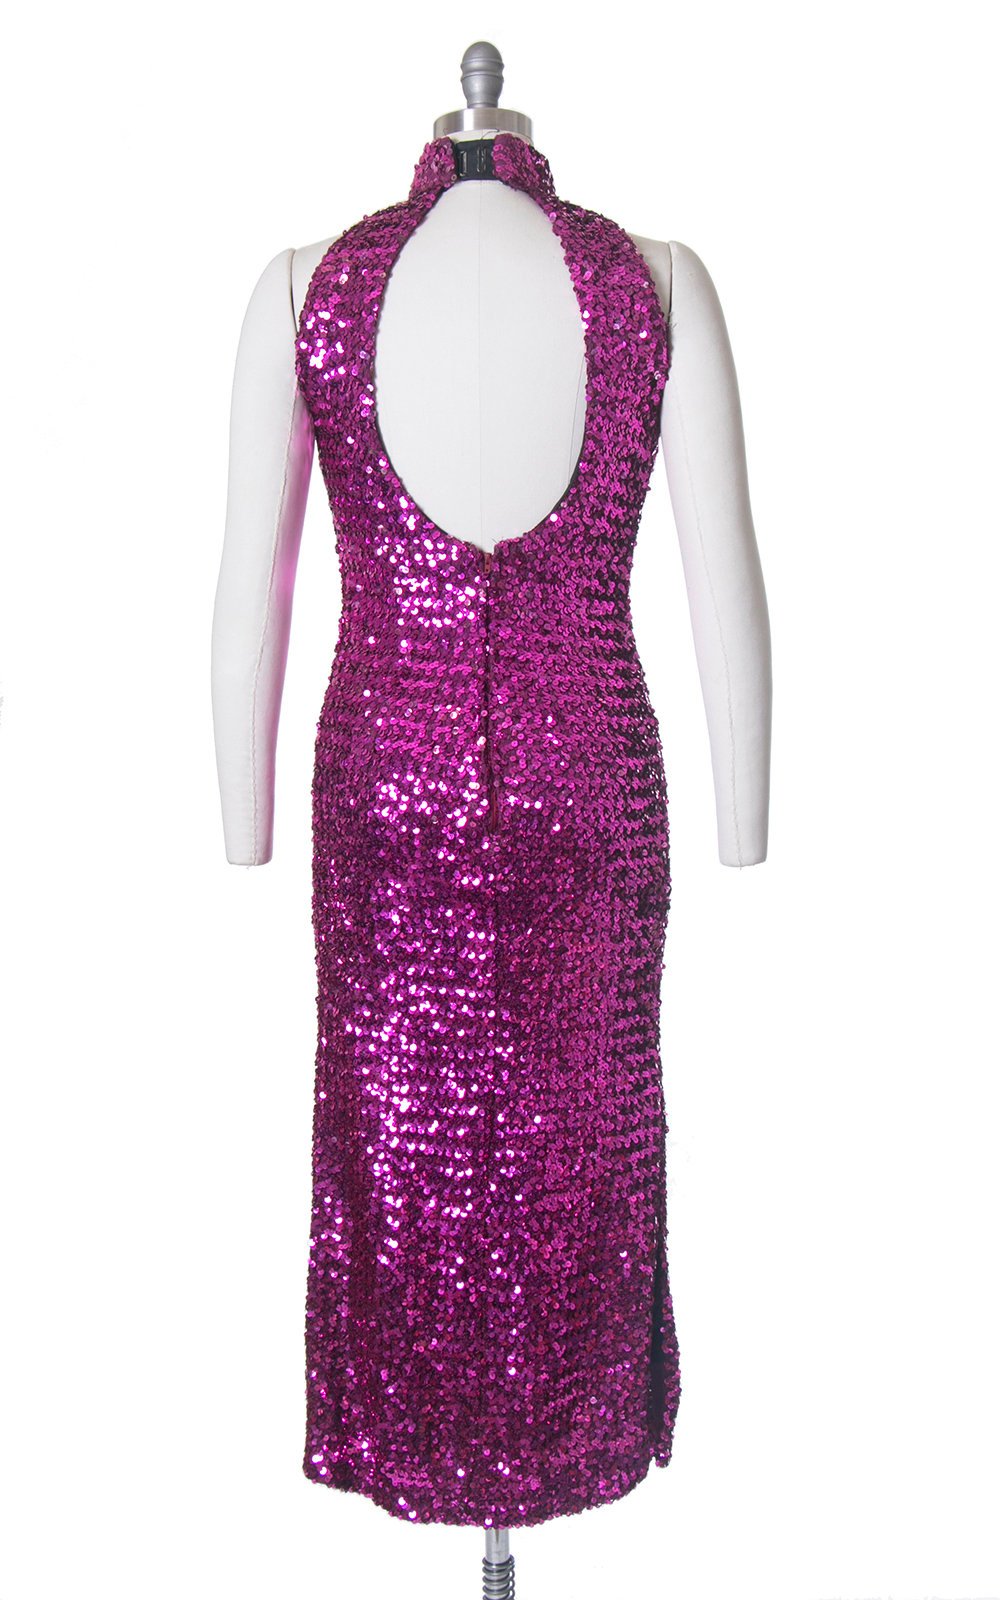 Vintage 1980s Dress | 80s Sequin Sparkly Purple Pink Halter Open Back Full Length Burlesque Holiday Party Dress (small/medium)